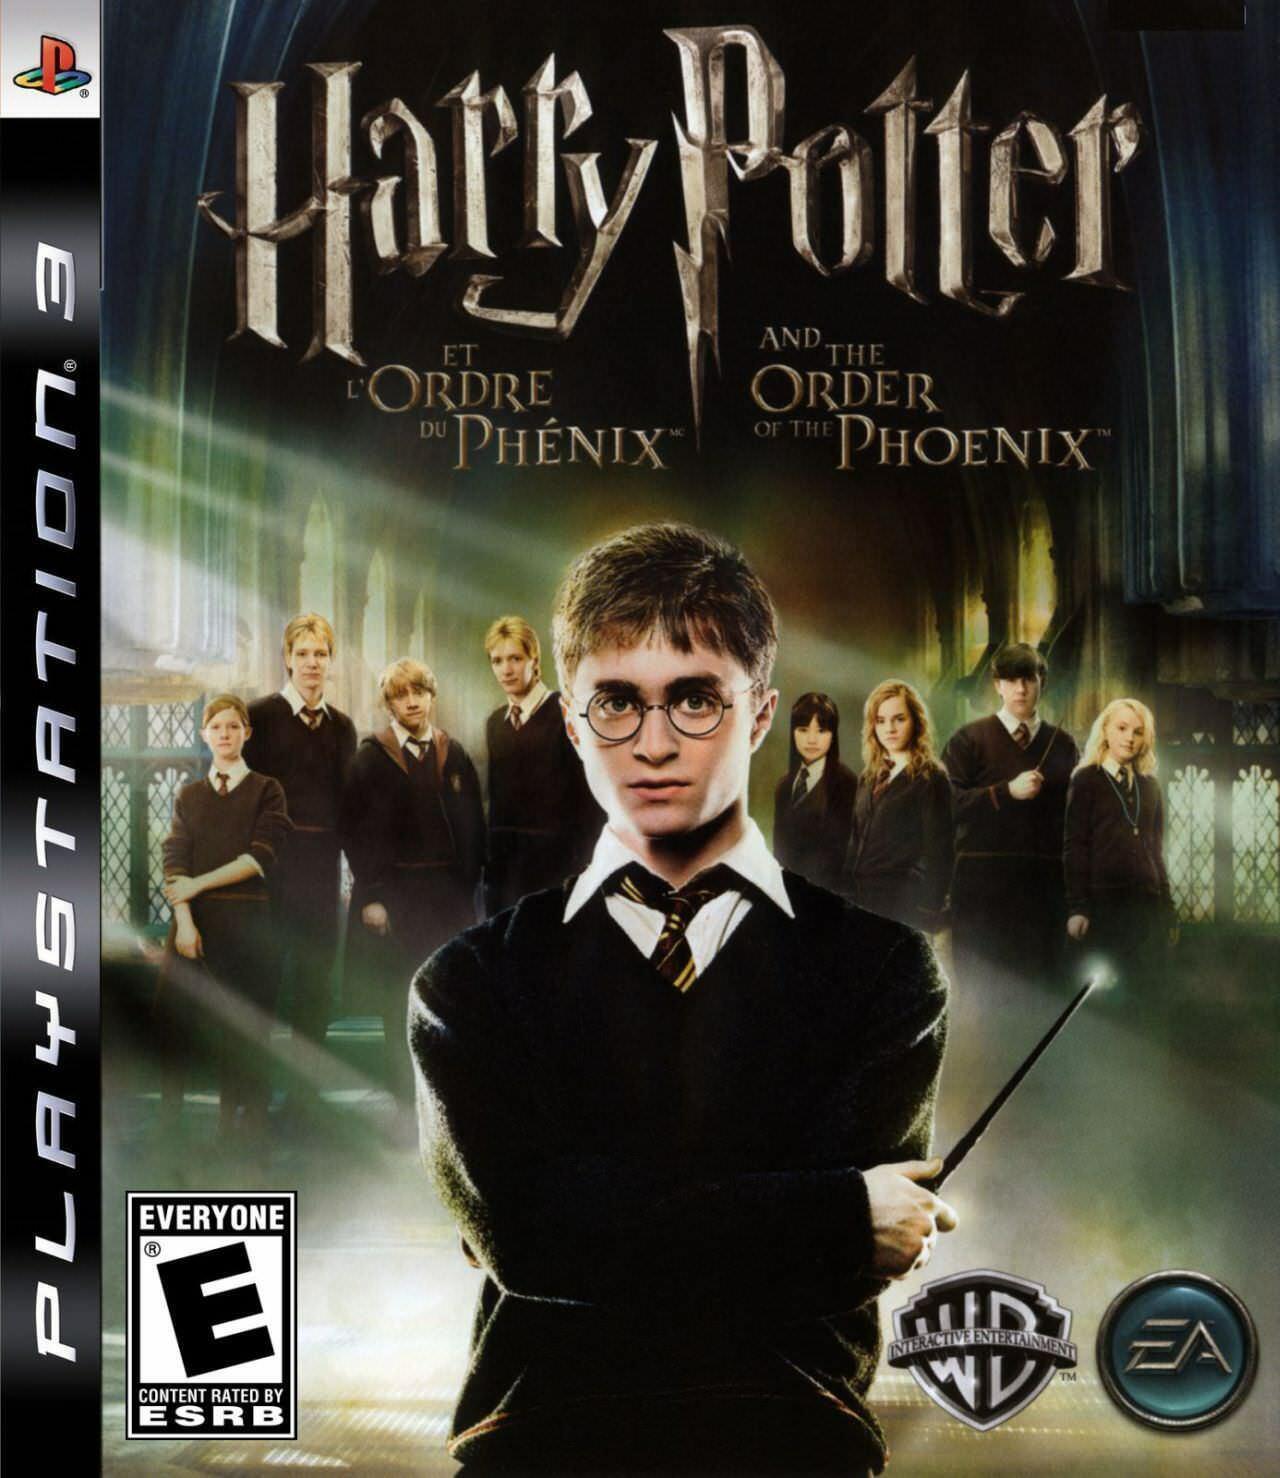 harry potter ps3 games